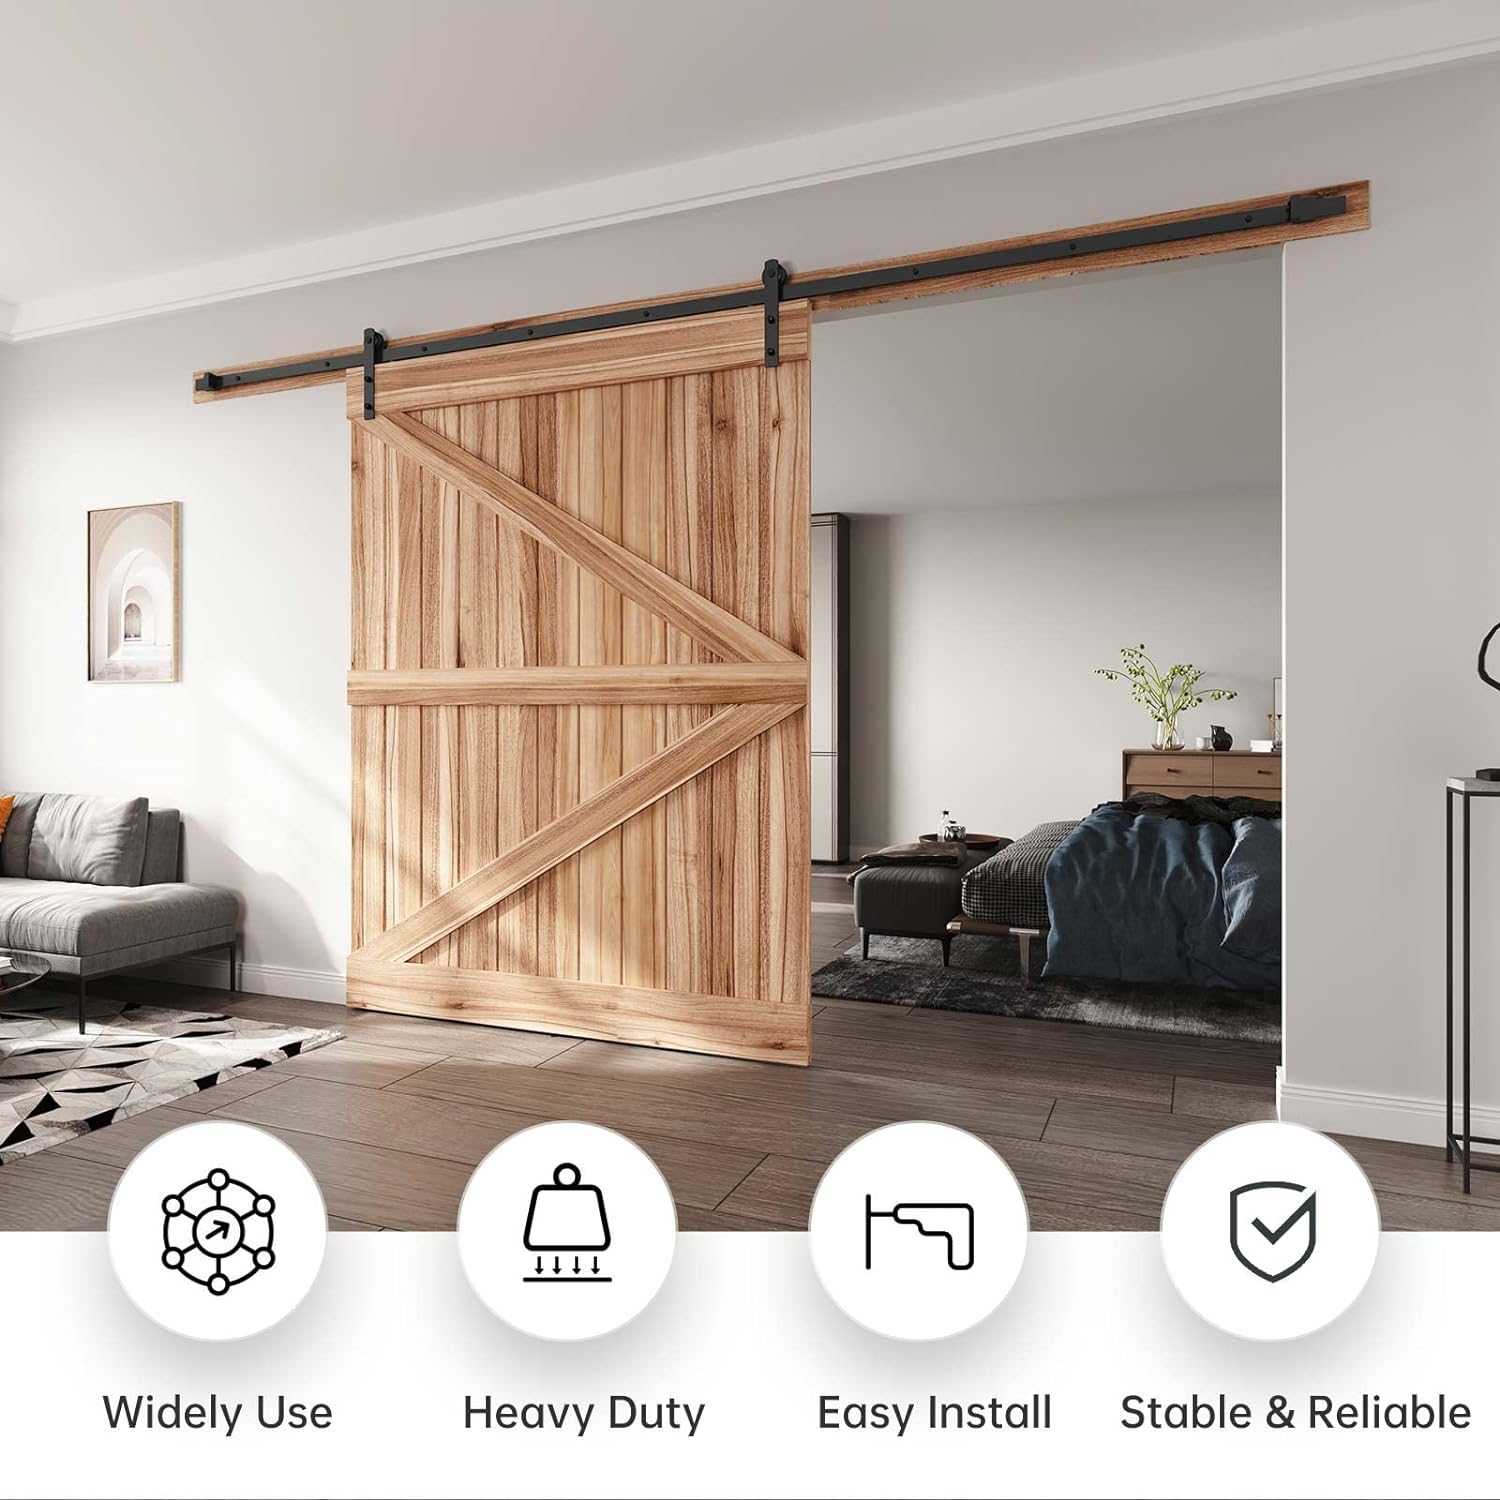 EaseLife 12 FT Heavy Duty Sliding Barn Door Hardware Track Kit,Straight Pulley,Slide Smoothly Quietly,Easy Install (12FT Track Kit for 7